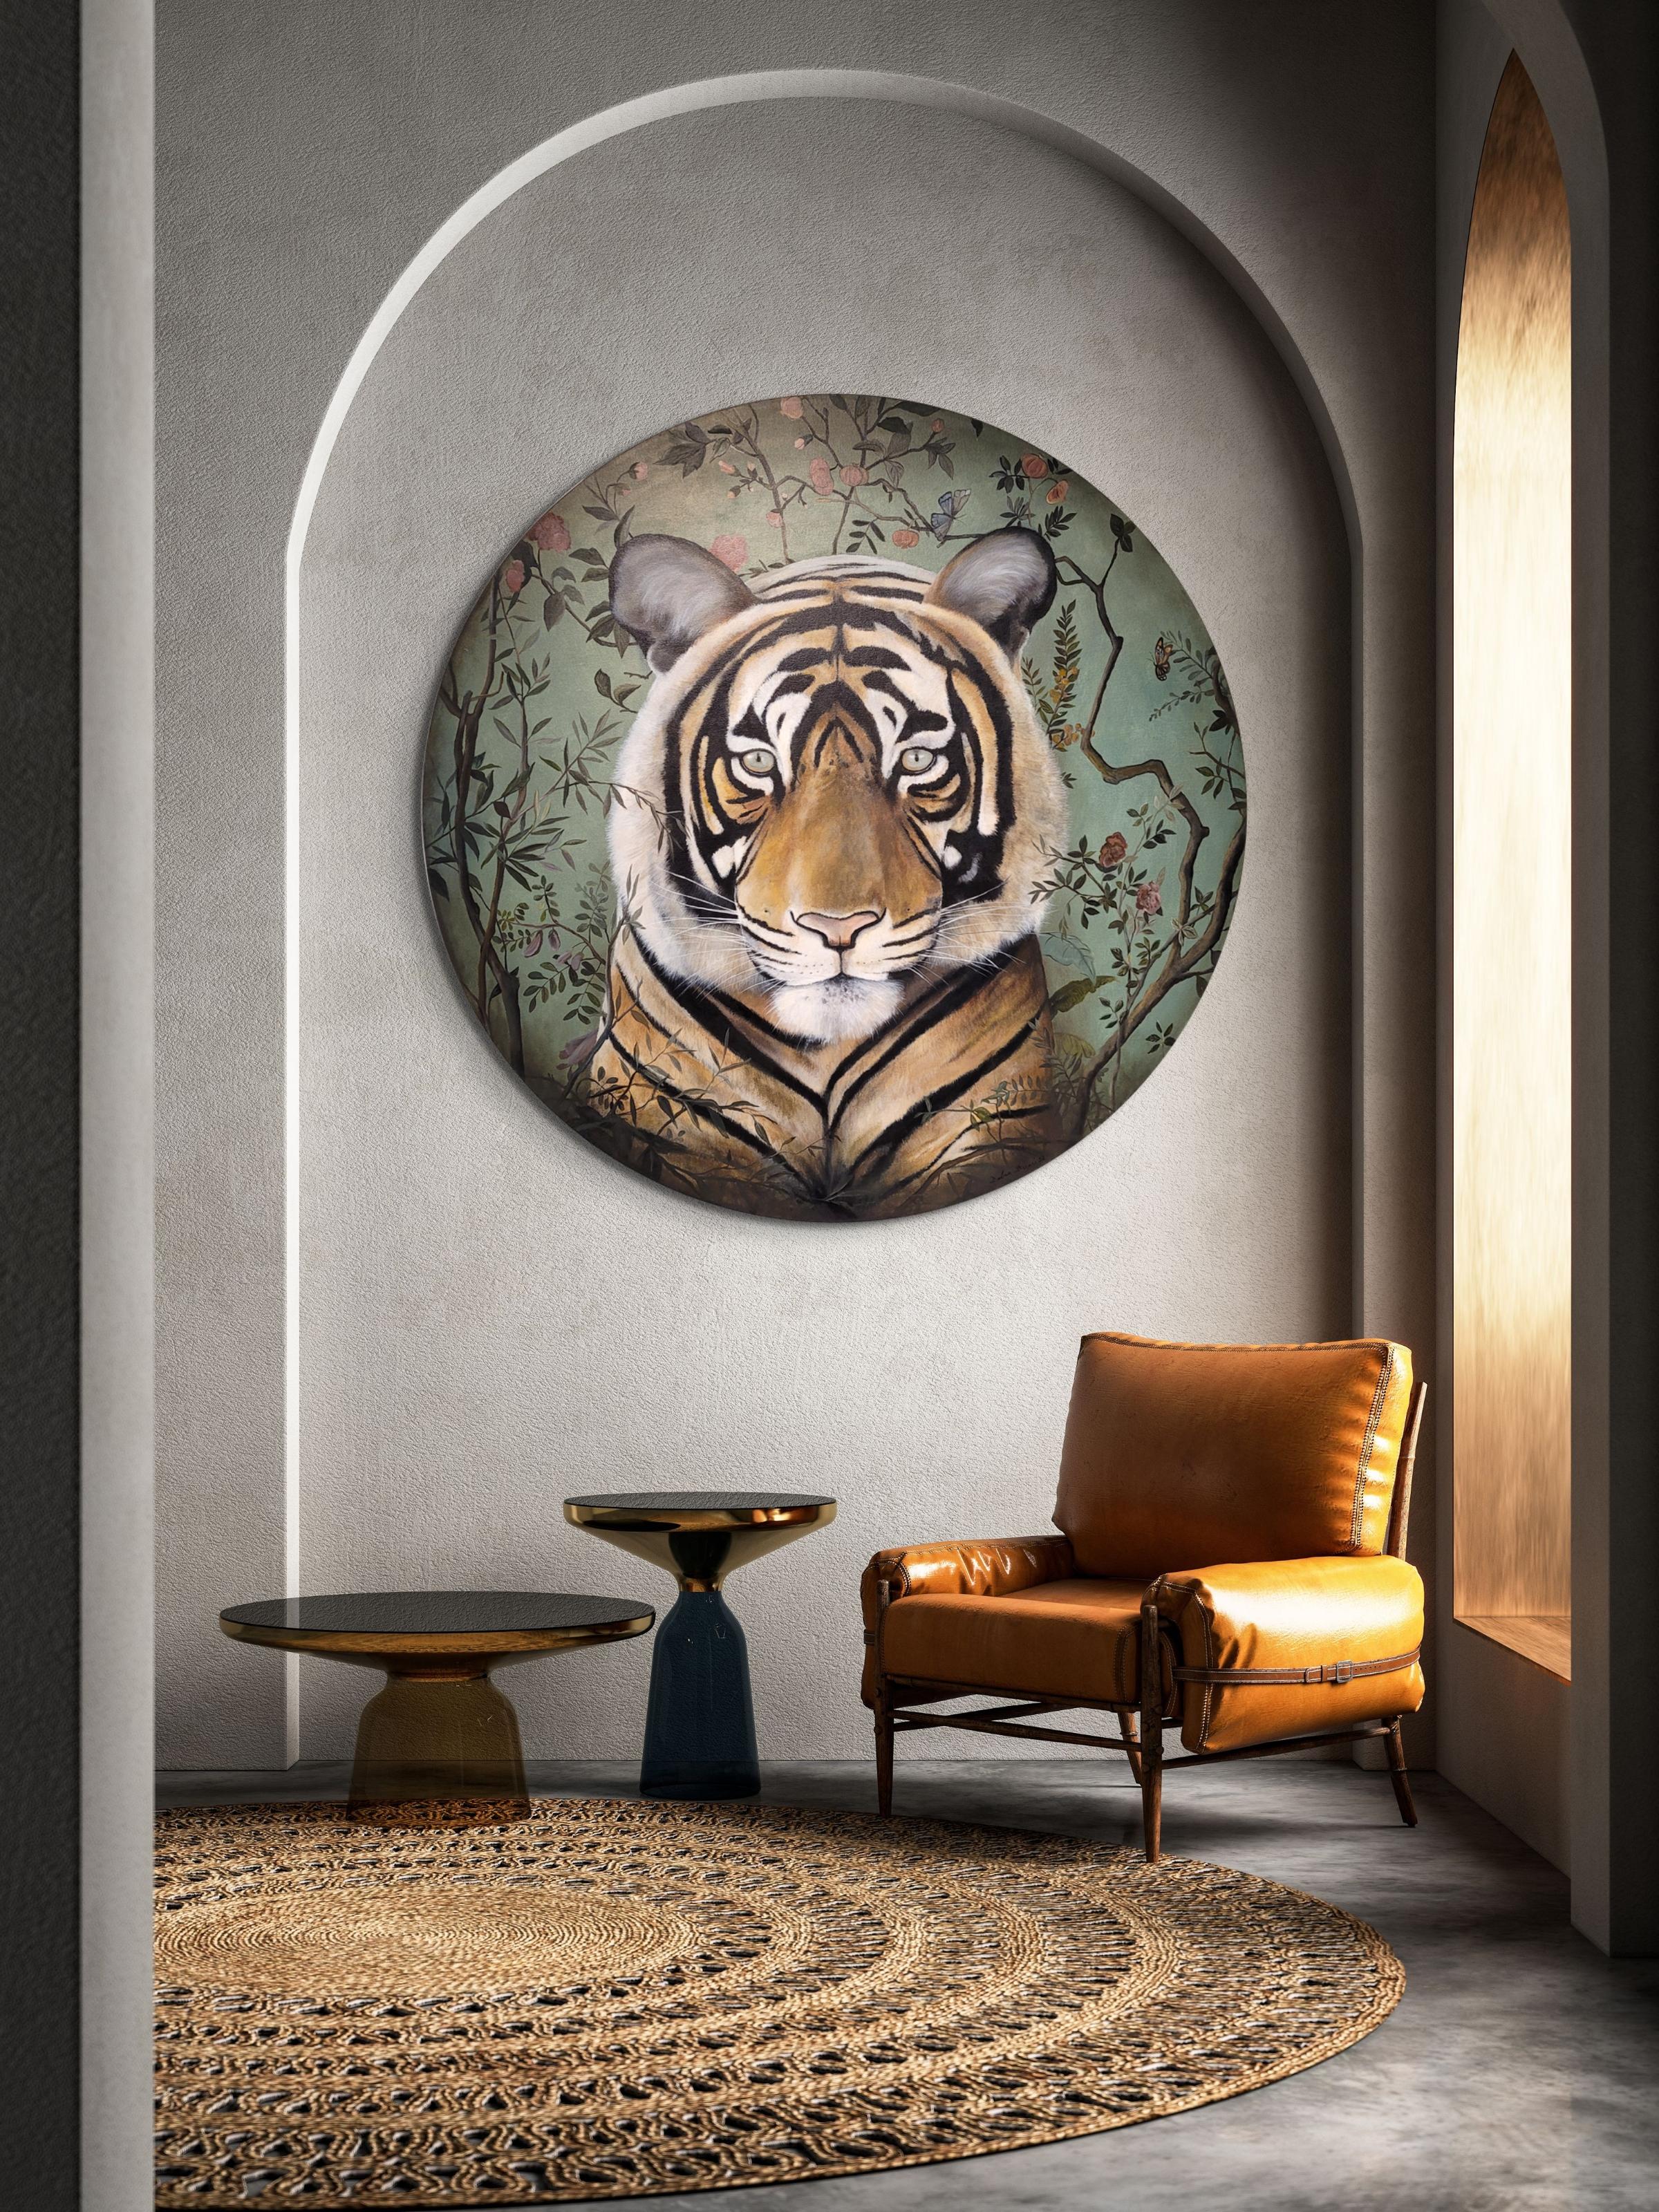 The Gucci Tiger realism nature and wildlife canvas painting is from my Ark Collection. This collection features extinct and or endangered animals set on either a Gucci or Hermes scarf pattern. I am a big fan of both of these fashion brands and their